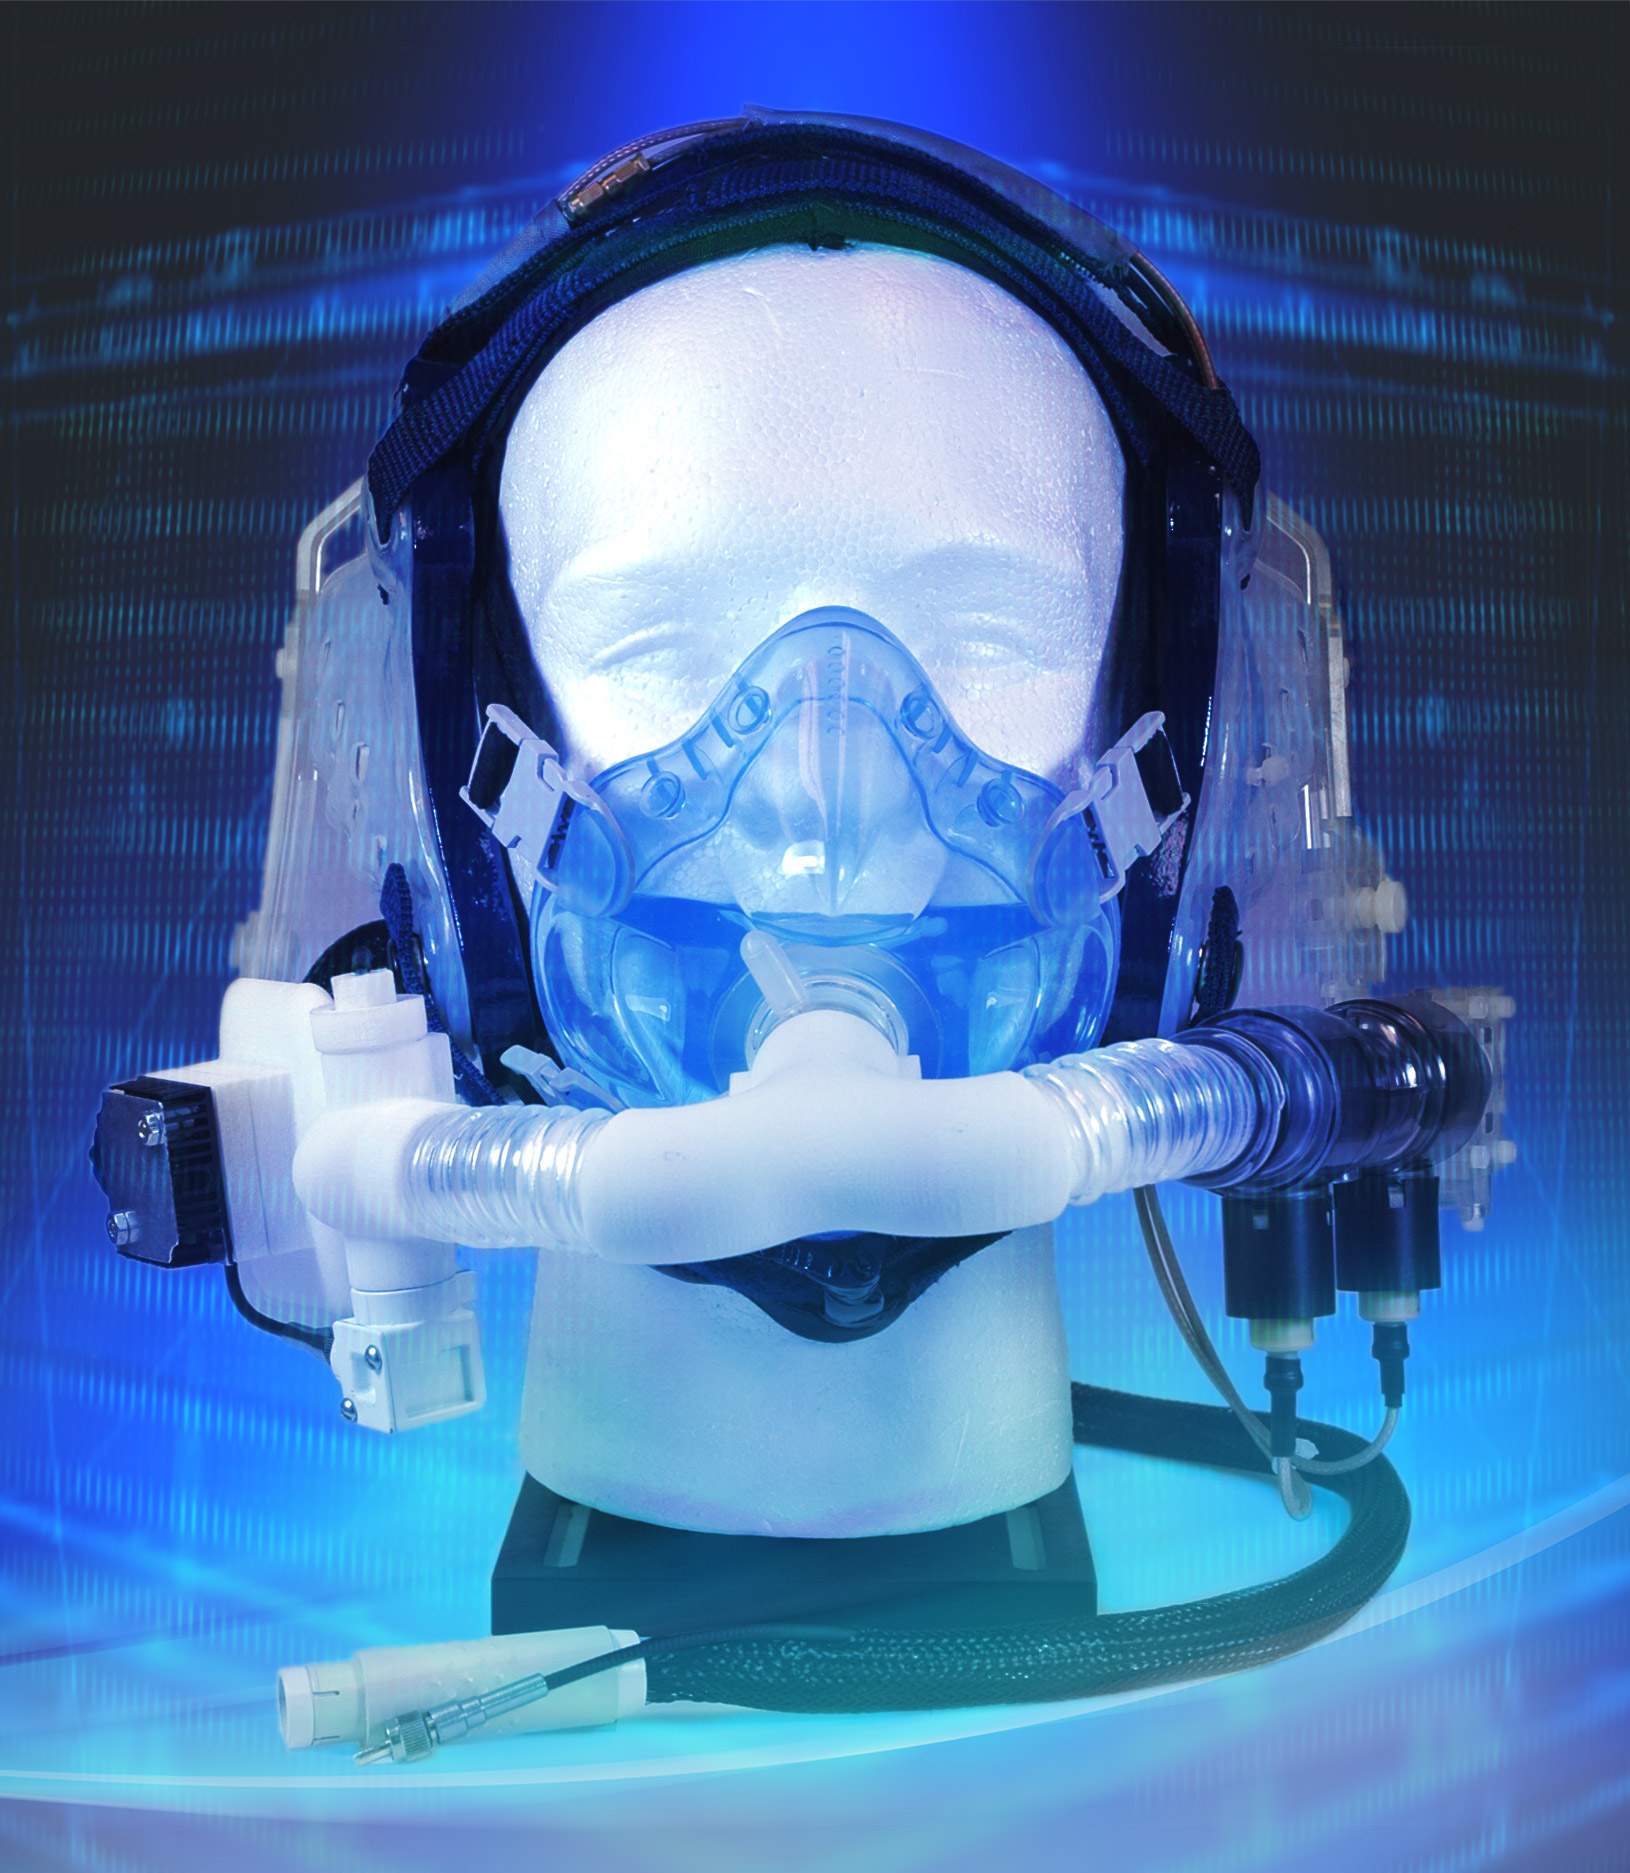 The Mask, shown here, features NASA developed sensors that help monitor healthcare patients for a variety of metabolic functions.